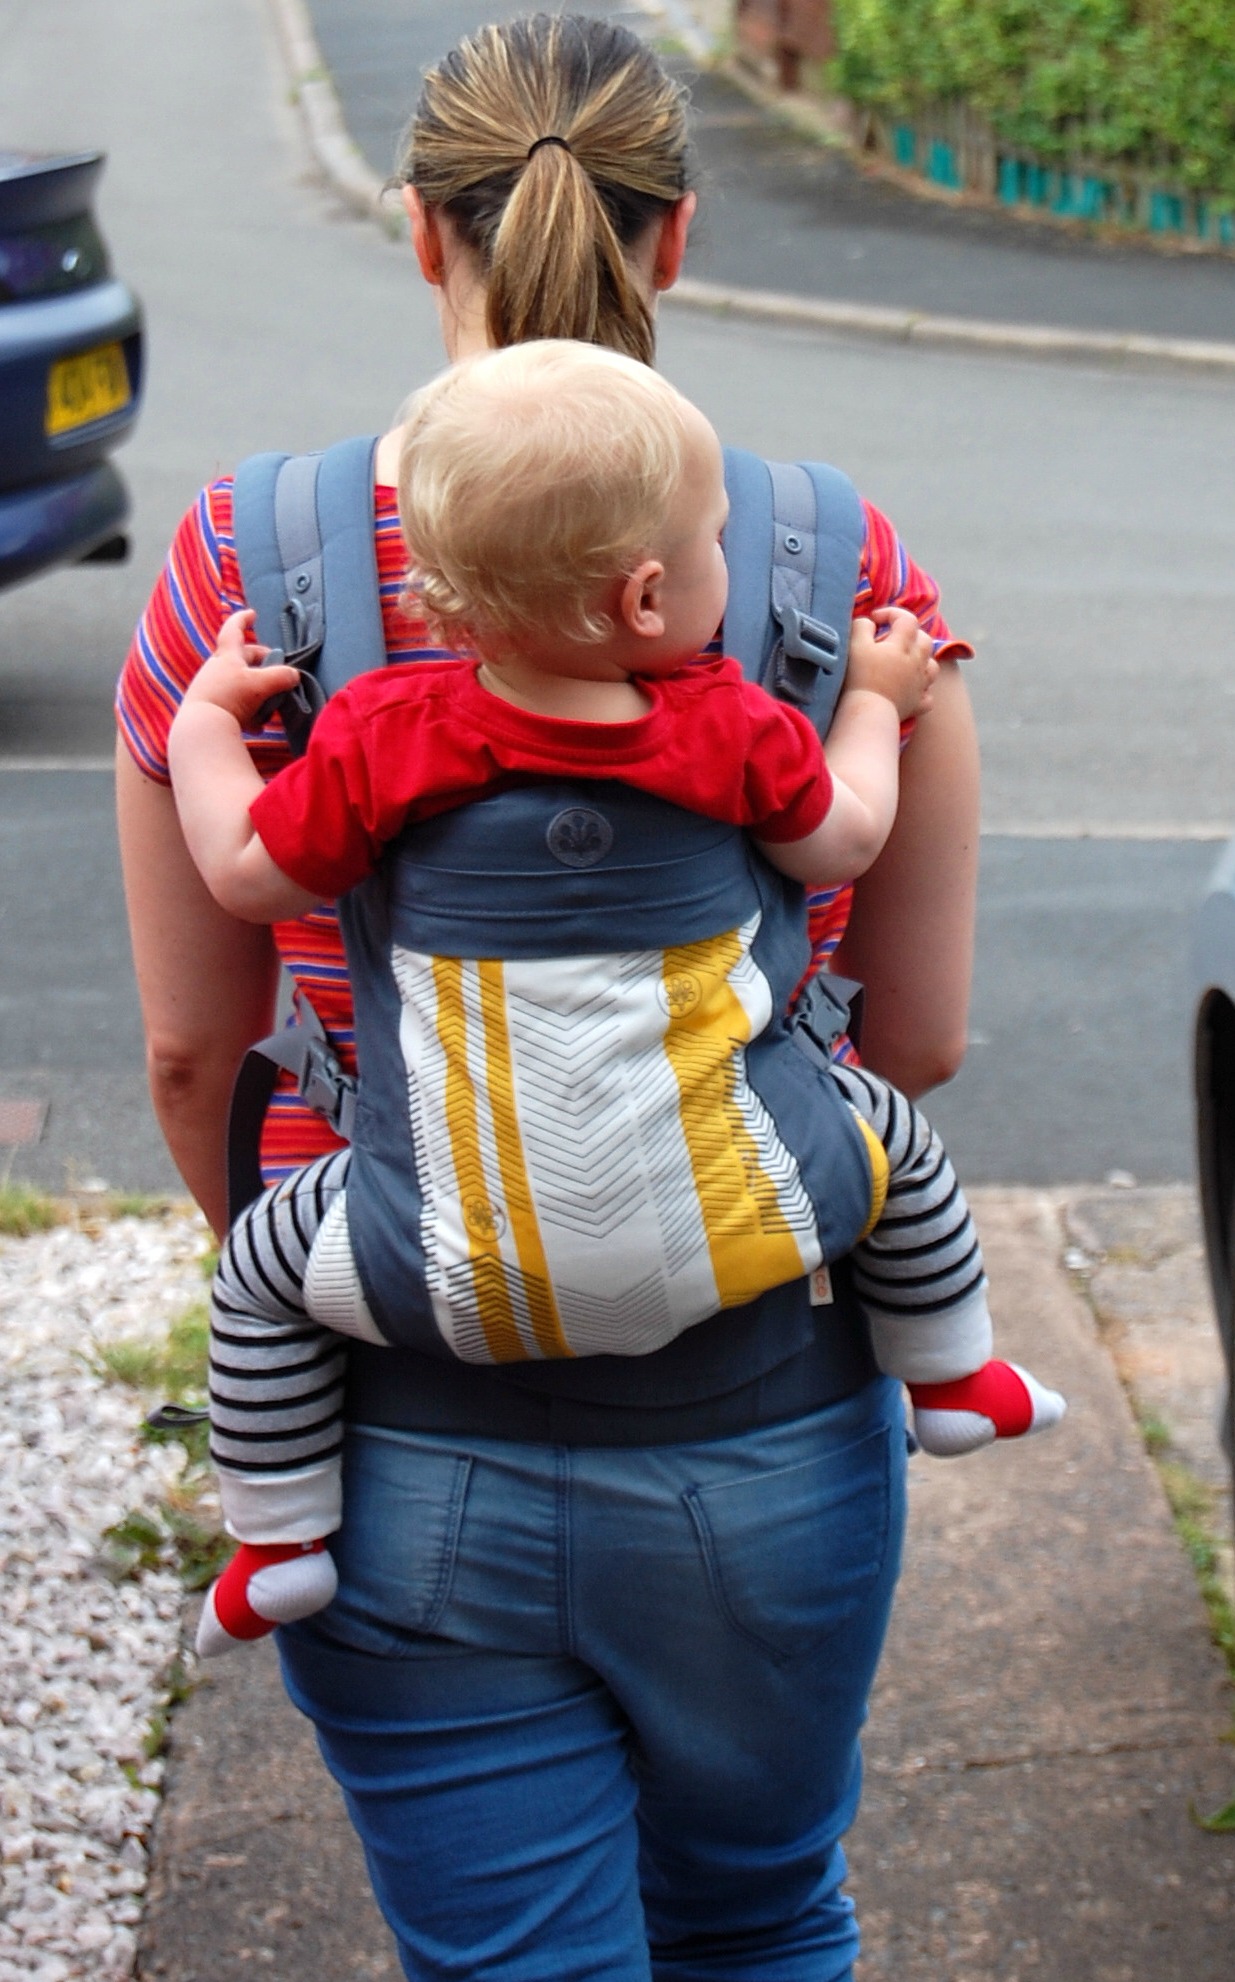 beco soleil baby carrier instructions